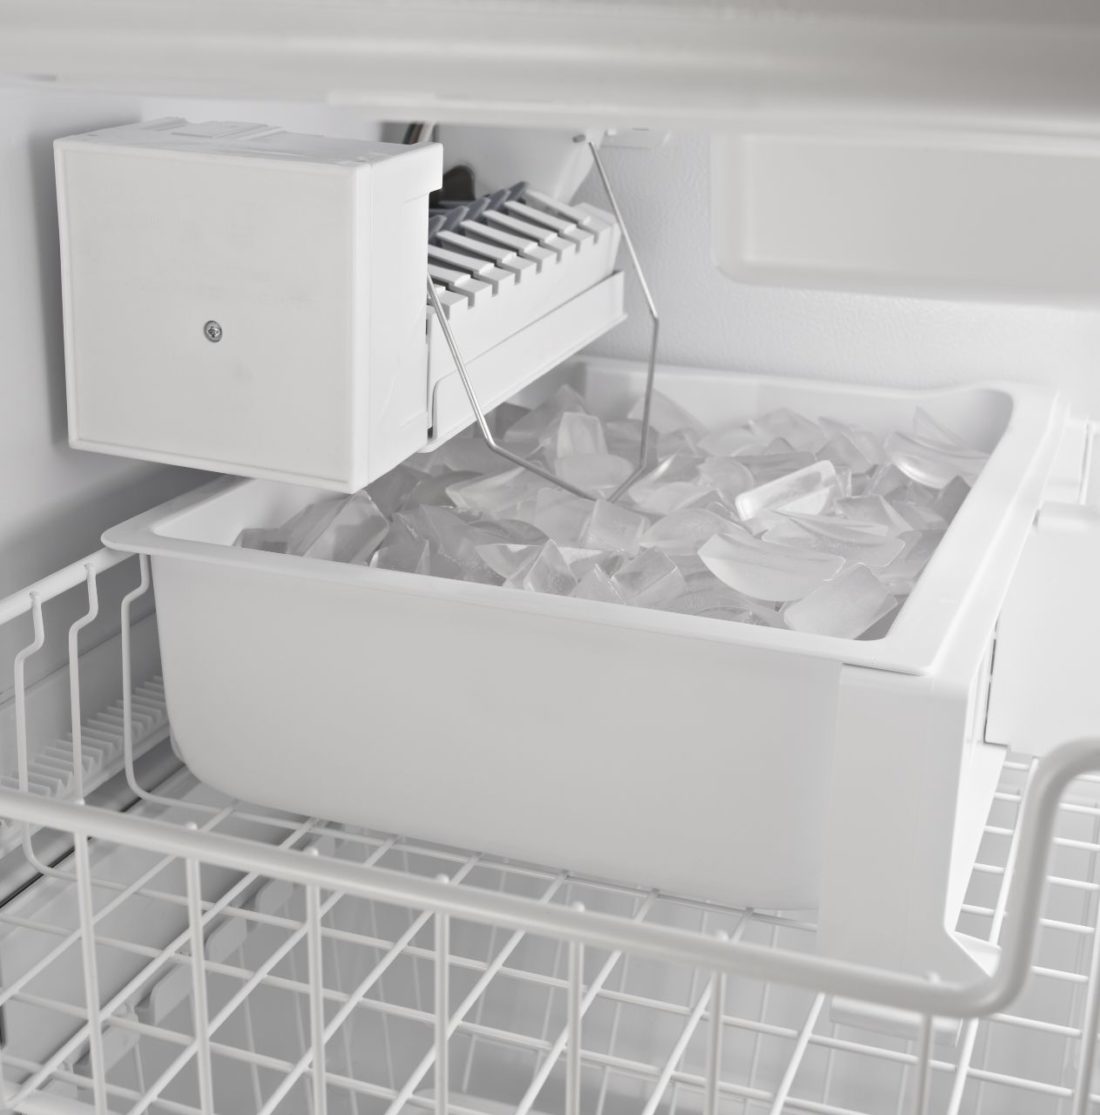 electric circuit t.c.o. ice maker